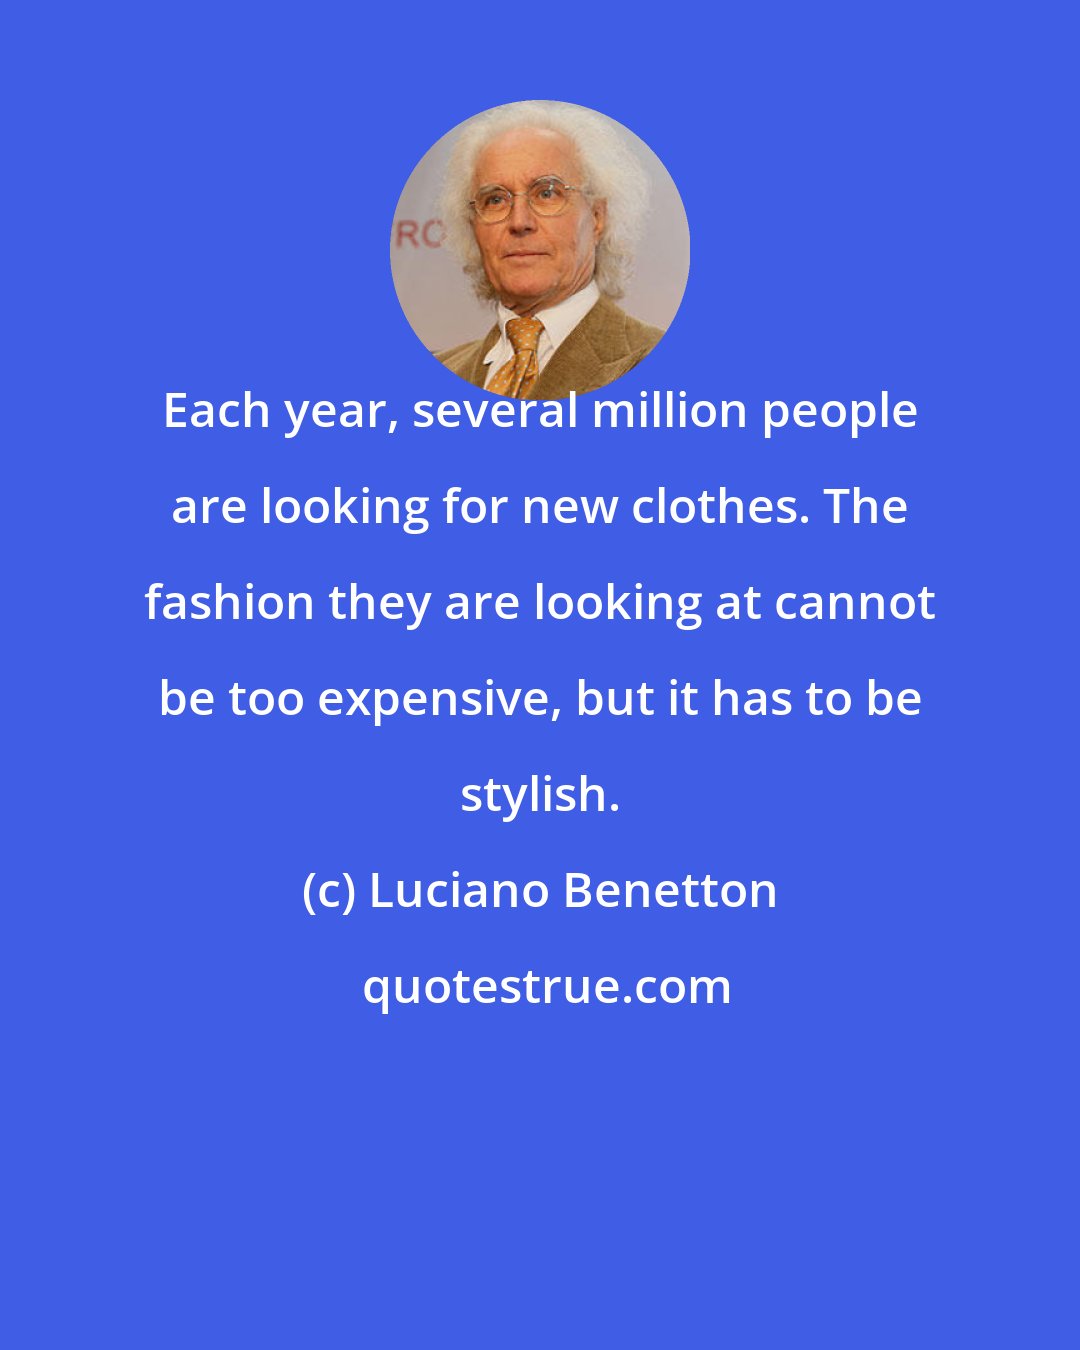 Luciano Benetton: Each year, several million people are looking for new clothes. The fashion they are looking at cannot be too expensive, but it has to be stylish.